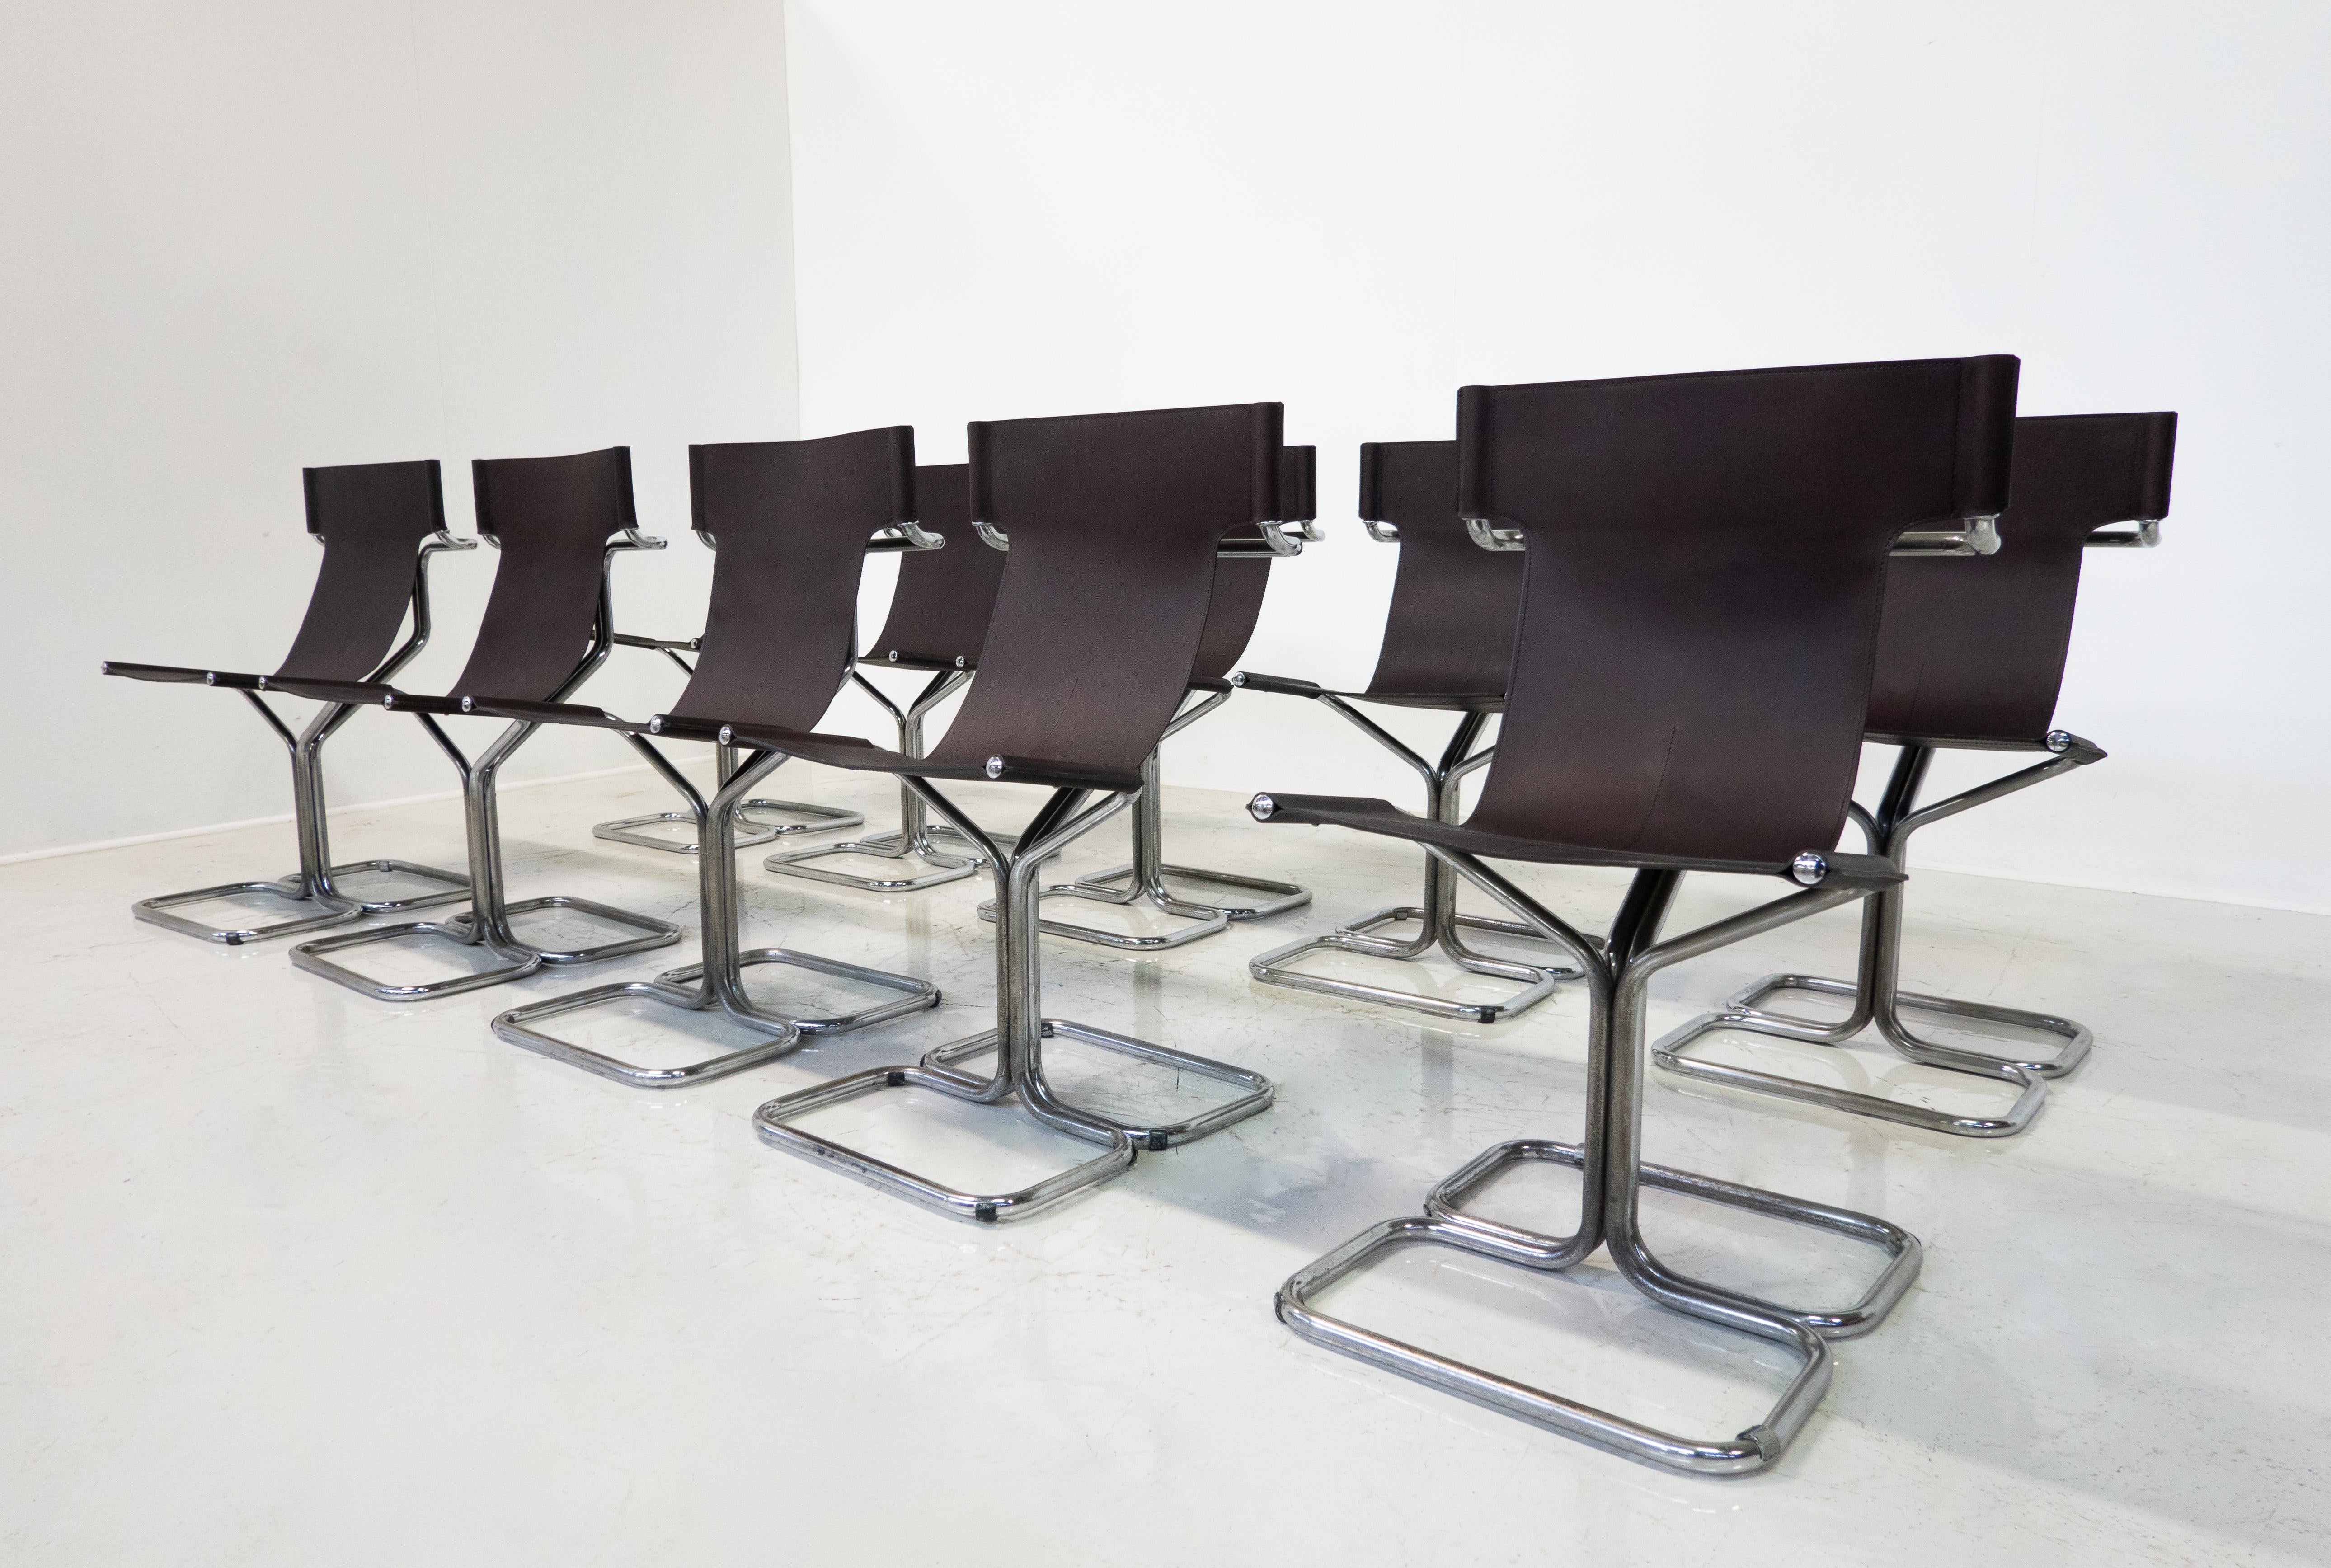 Late 20th Century Mid-Century Modern Set of 10 'Topos' Chairs by Gruppo DAM for Busnelli, 1970s For Sale